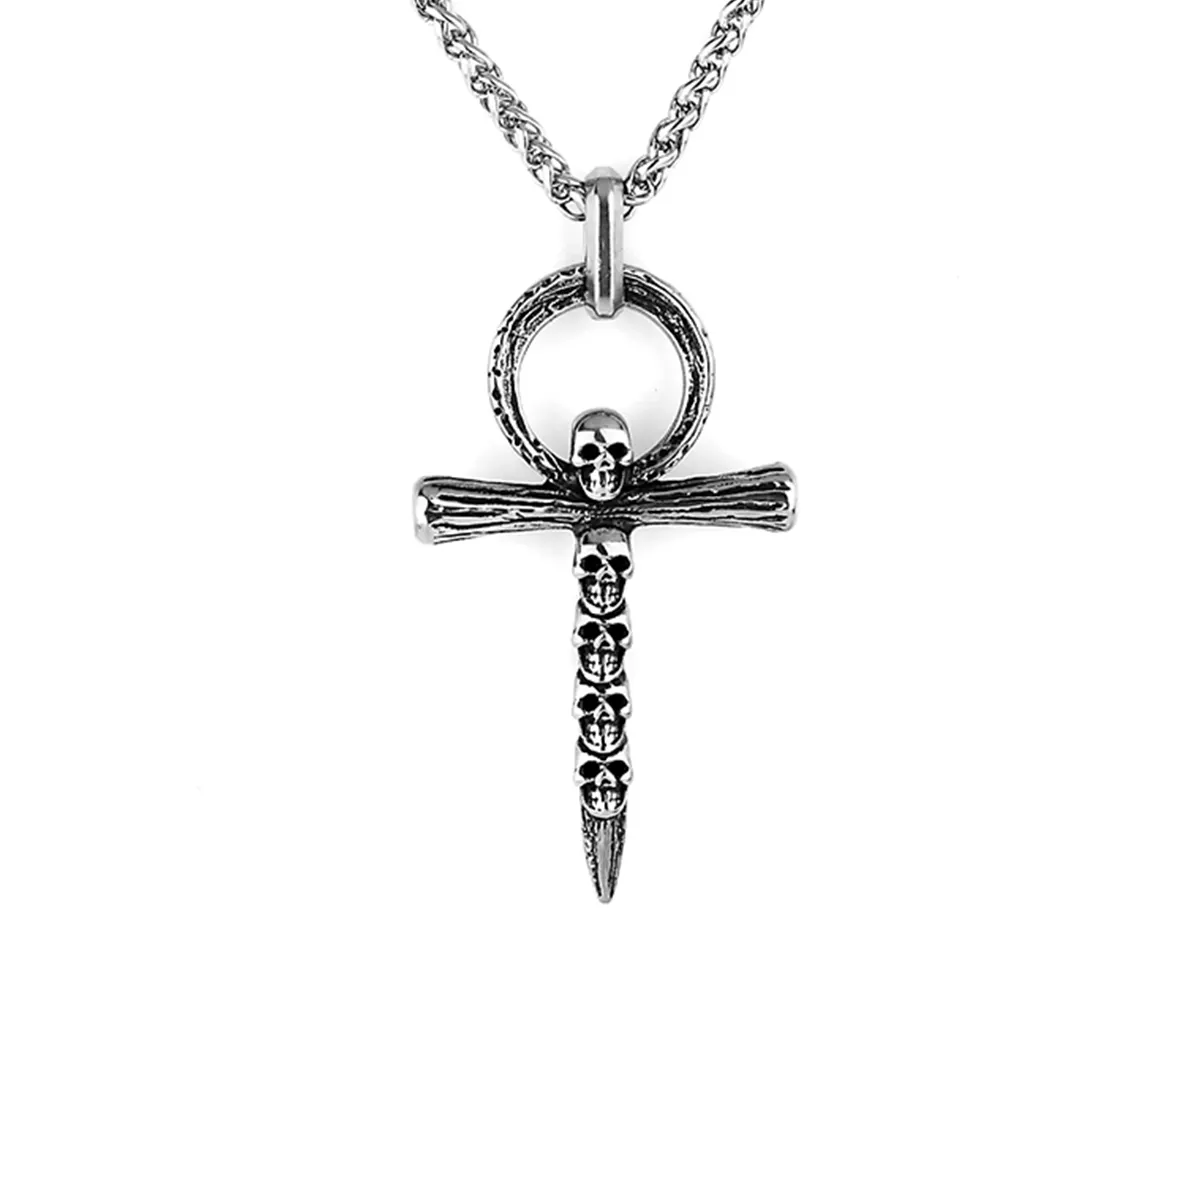 Hip Hop Cross Pendant Biker Punk Necklace Stainless Steel Men's Skull Cross Ring Necklace for Religious Gothic Jewelry